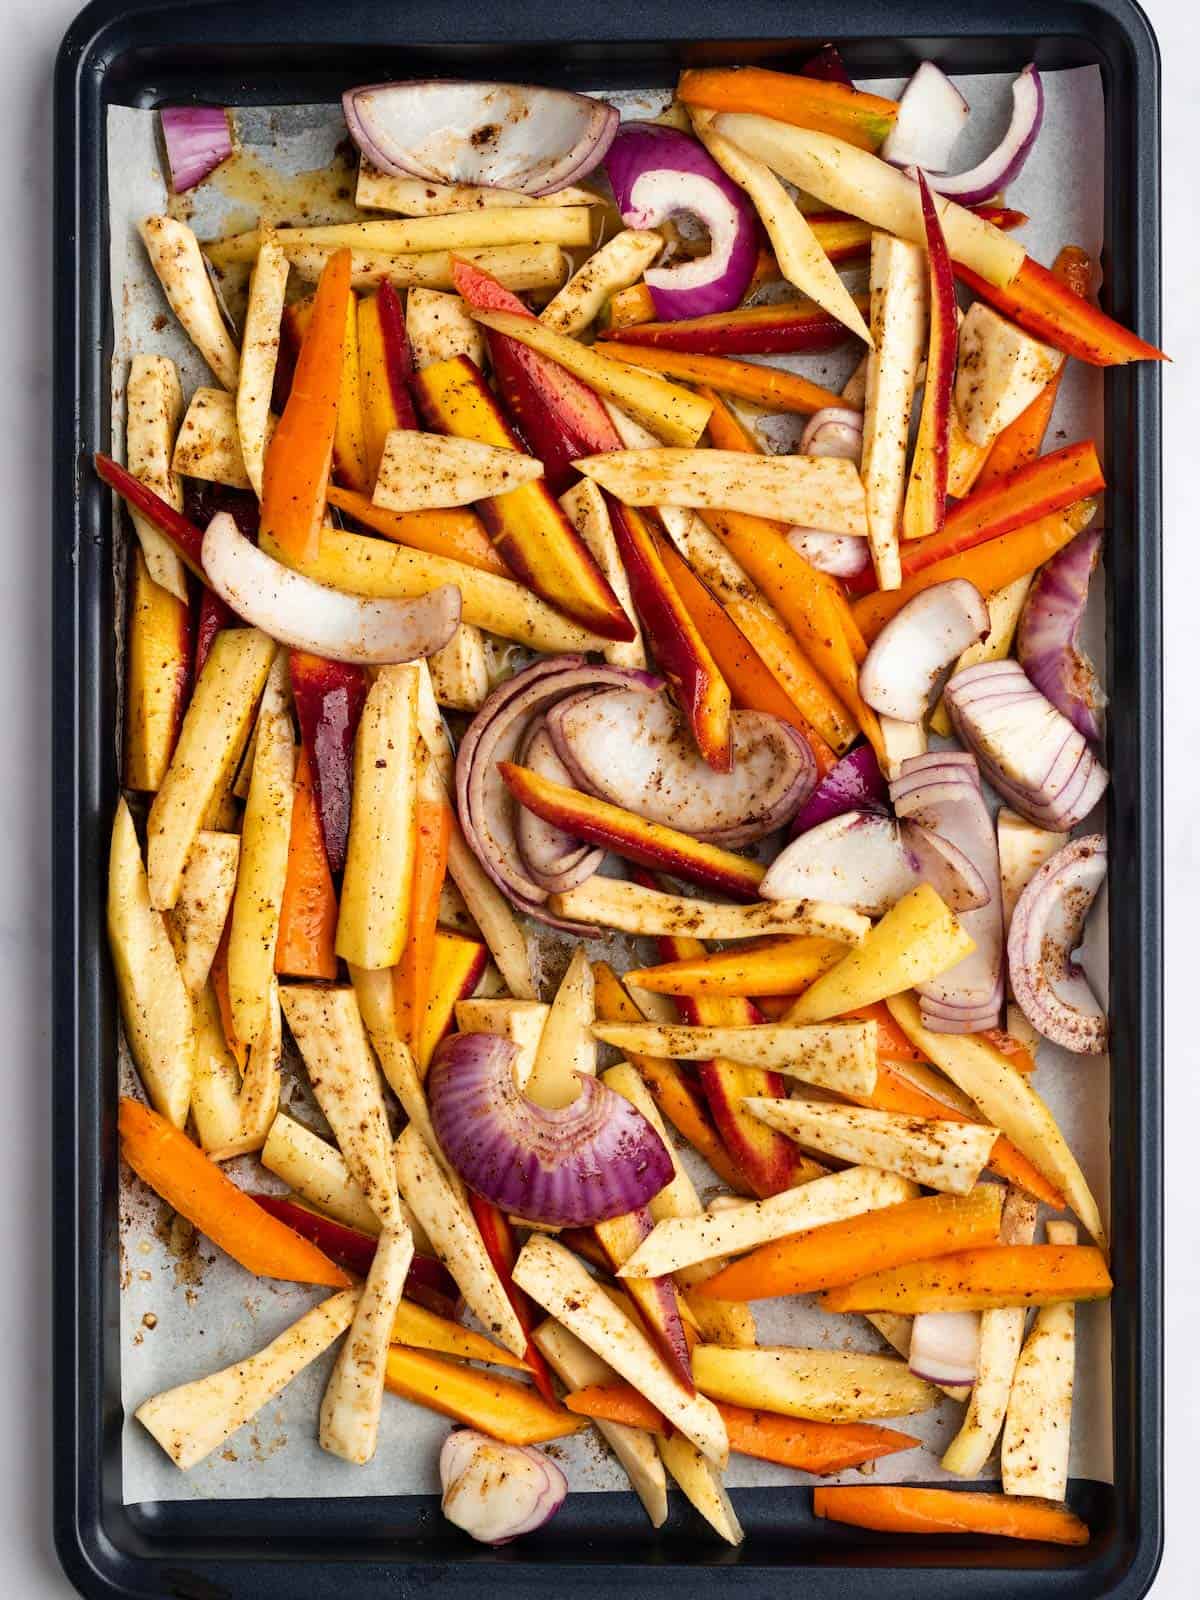 Carrots, onions, and parsnips on a baking sheet with parchment tossed in seasonings.